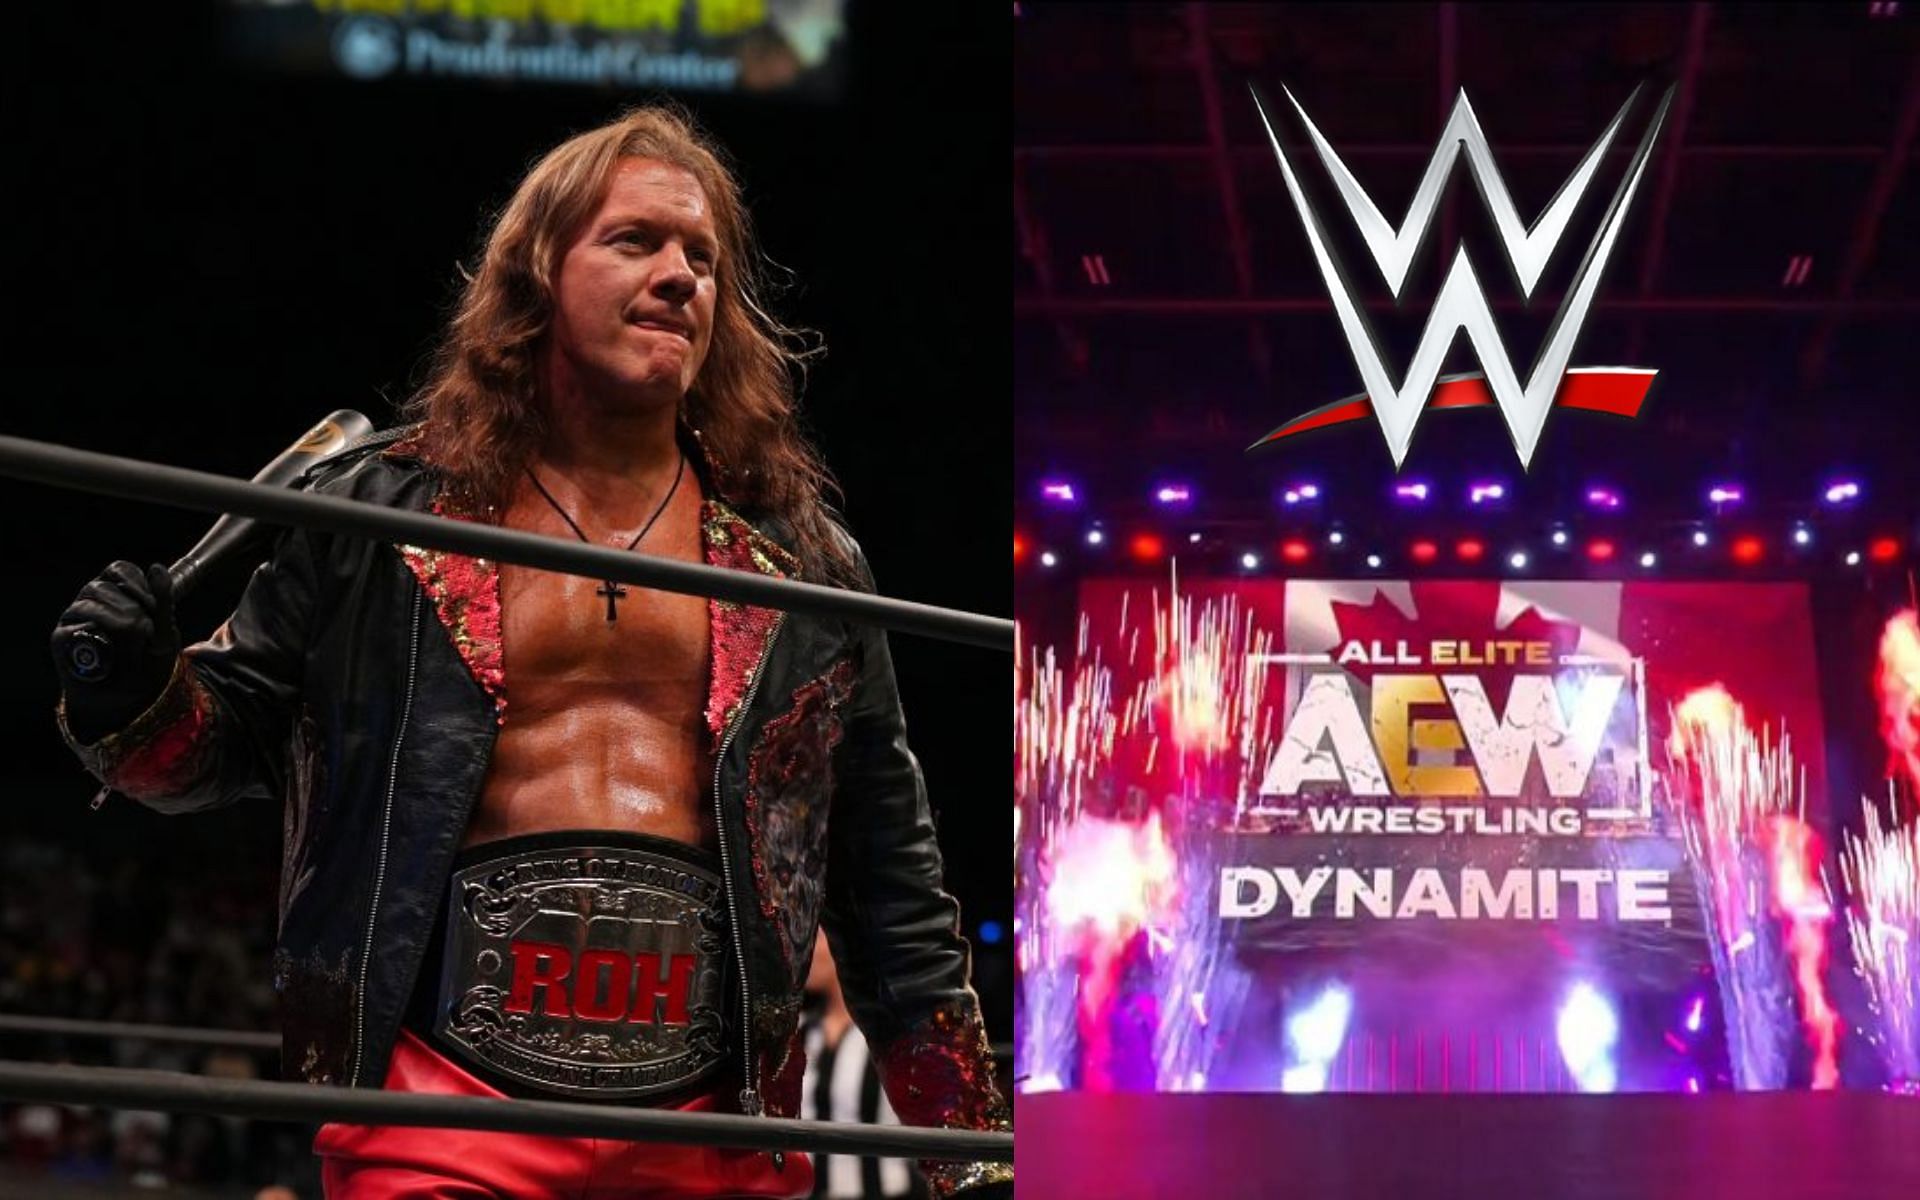 Chris Jericho was spotted with a former WWE Superstar during AEW Dynamite in Canada.